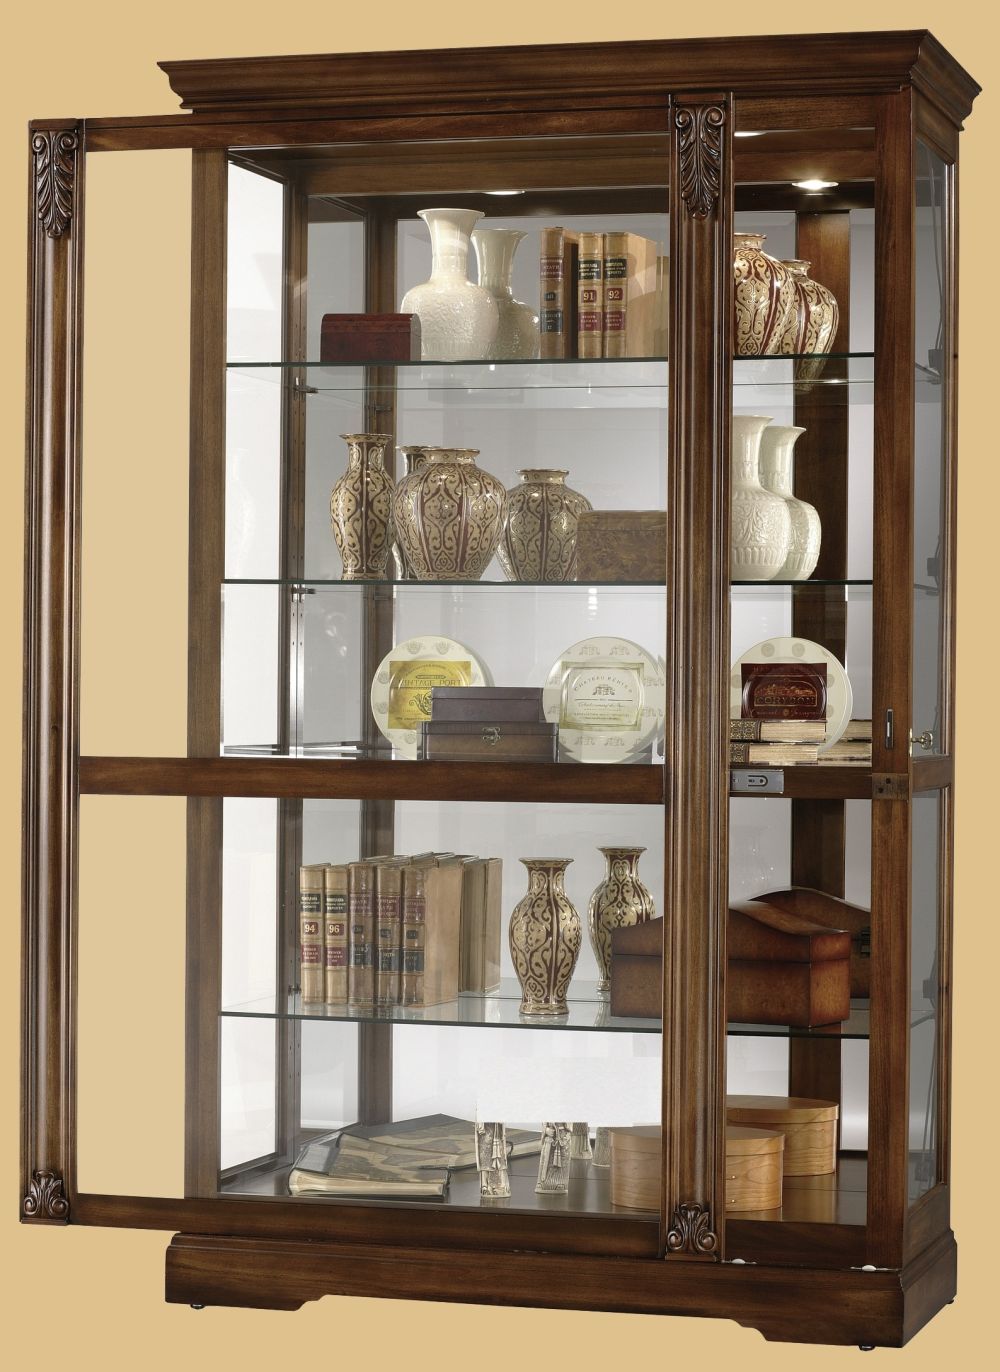 wooden-brown-mounted-big-cabinet-wall-mounted-curio-cabinet-and-what-to-consider-when-purchasing